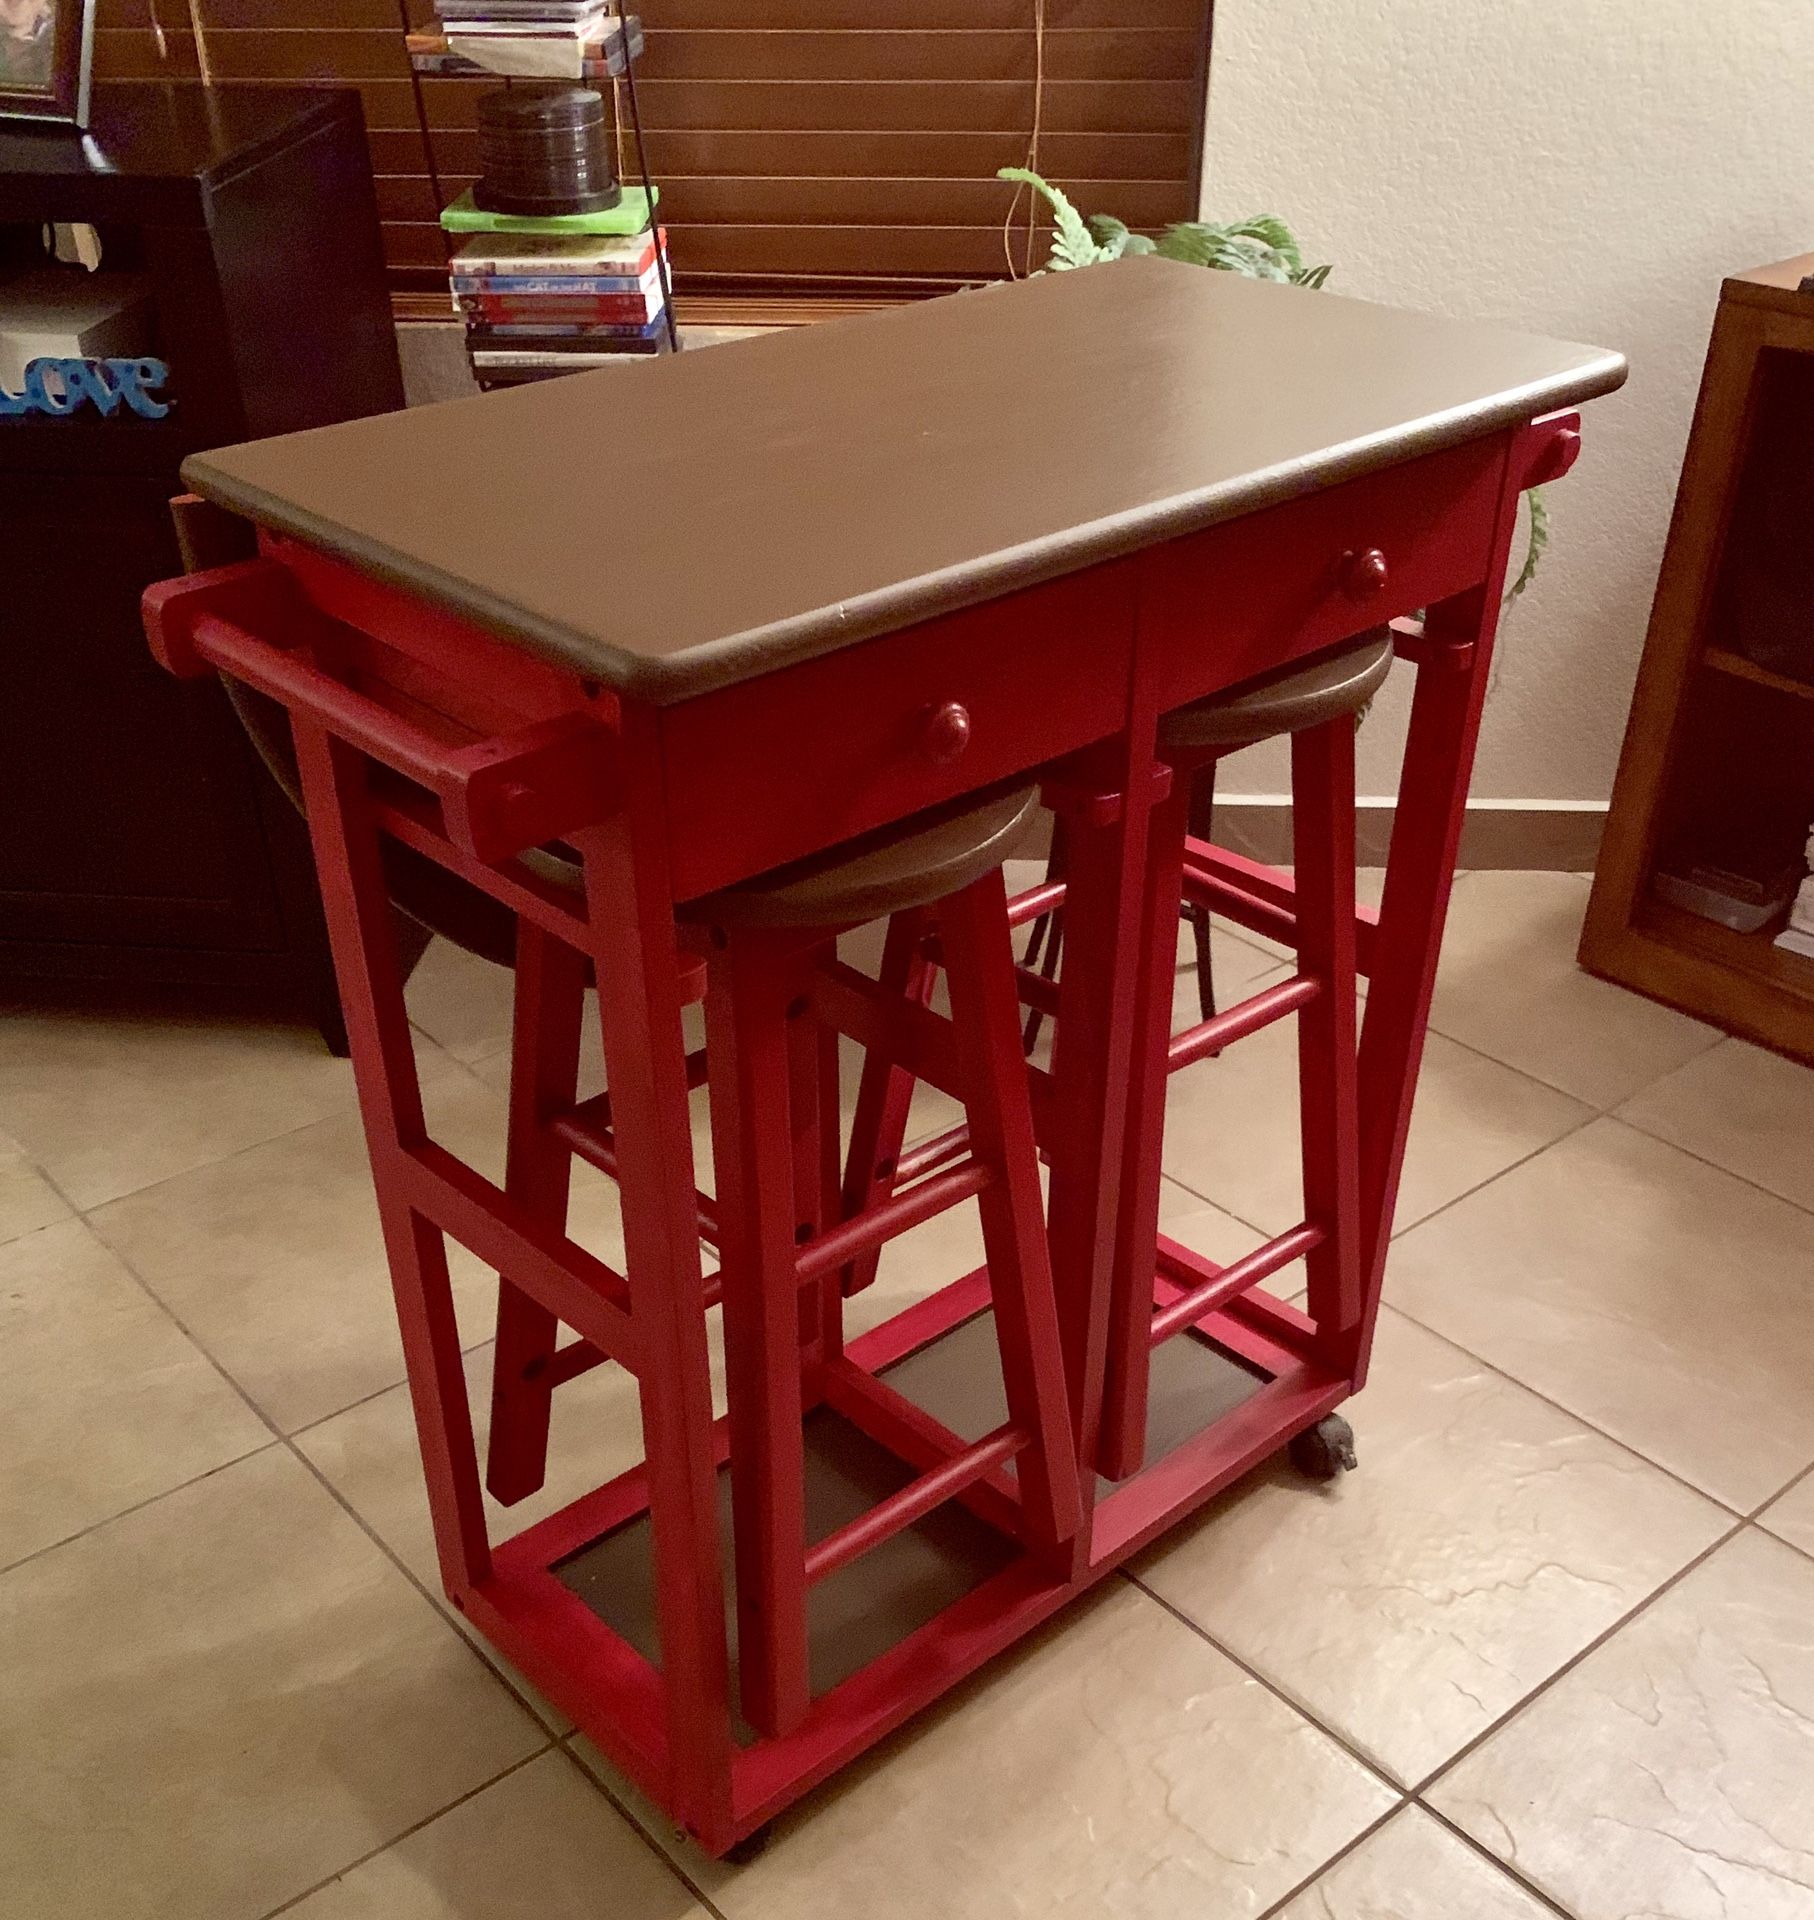 3 Piece Kitchen Island/Breakfast Bar with 2 barstools & 2 drawers on wheels & extending table